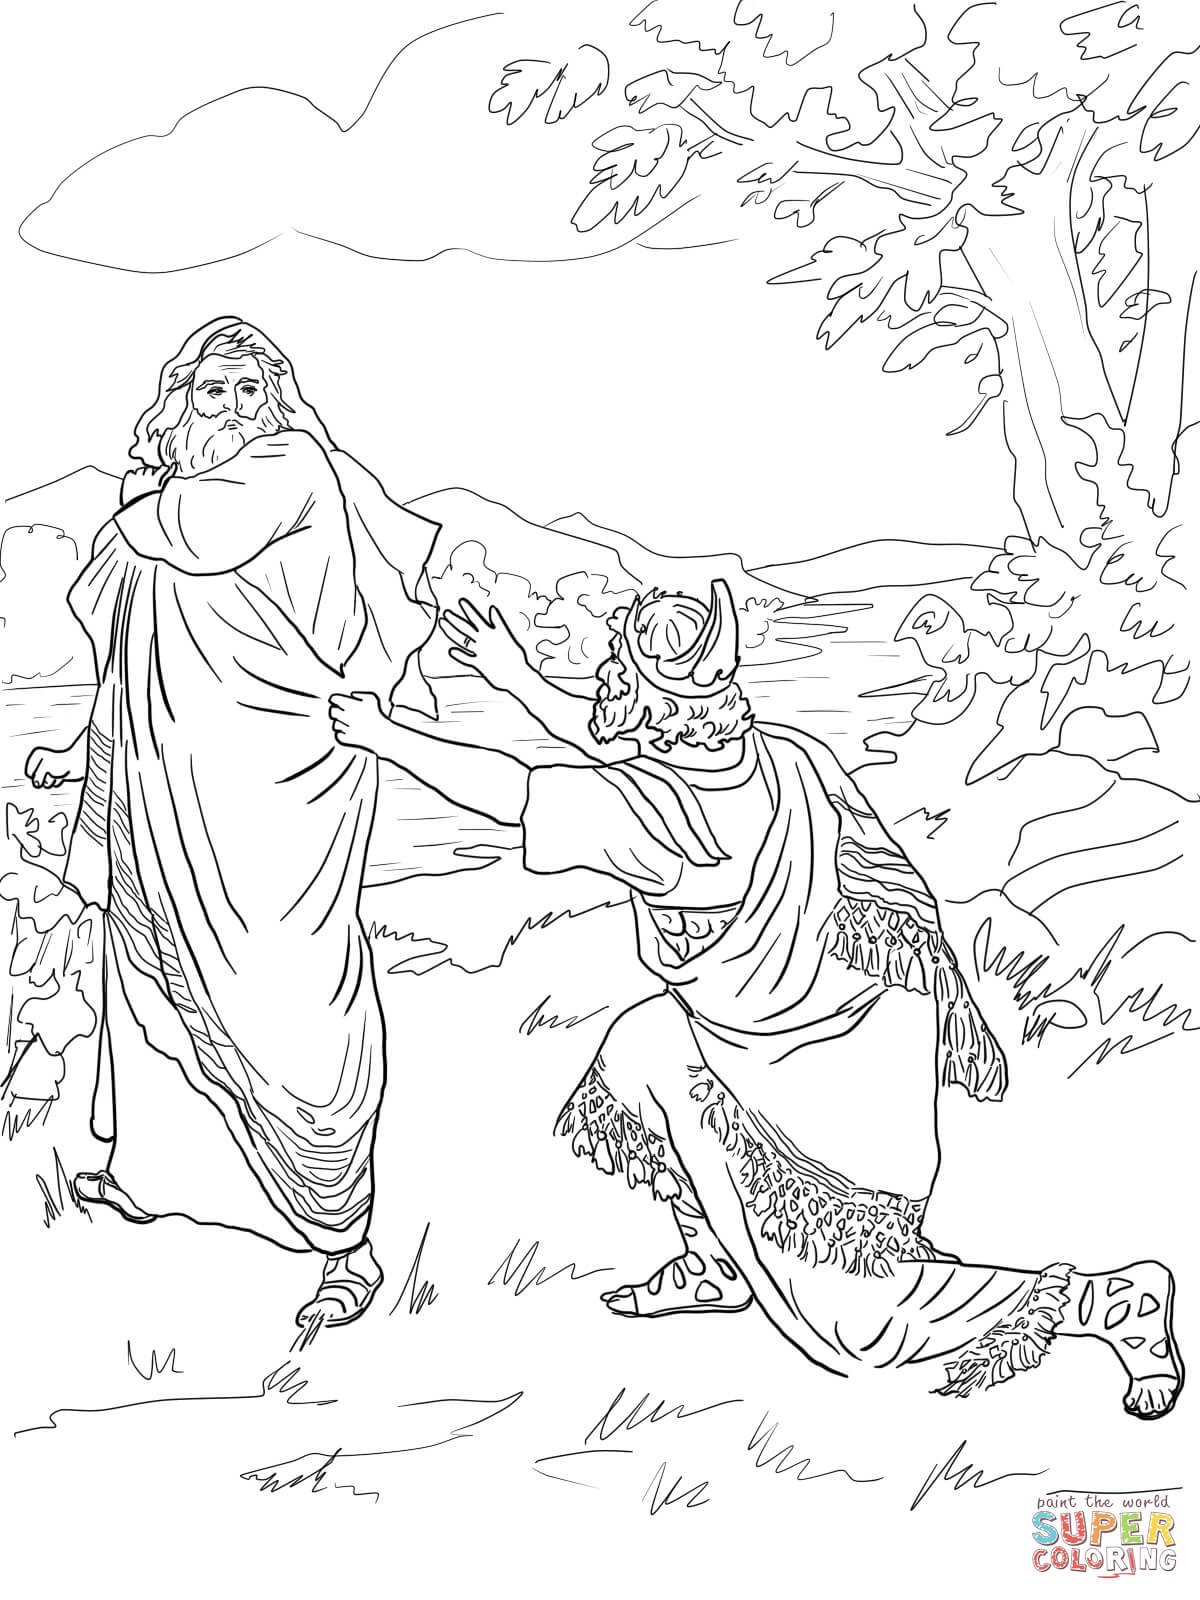 King Saul coloring pages | Free Coloring Pages